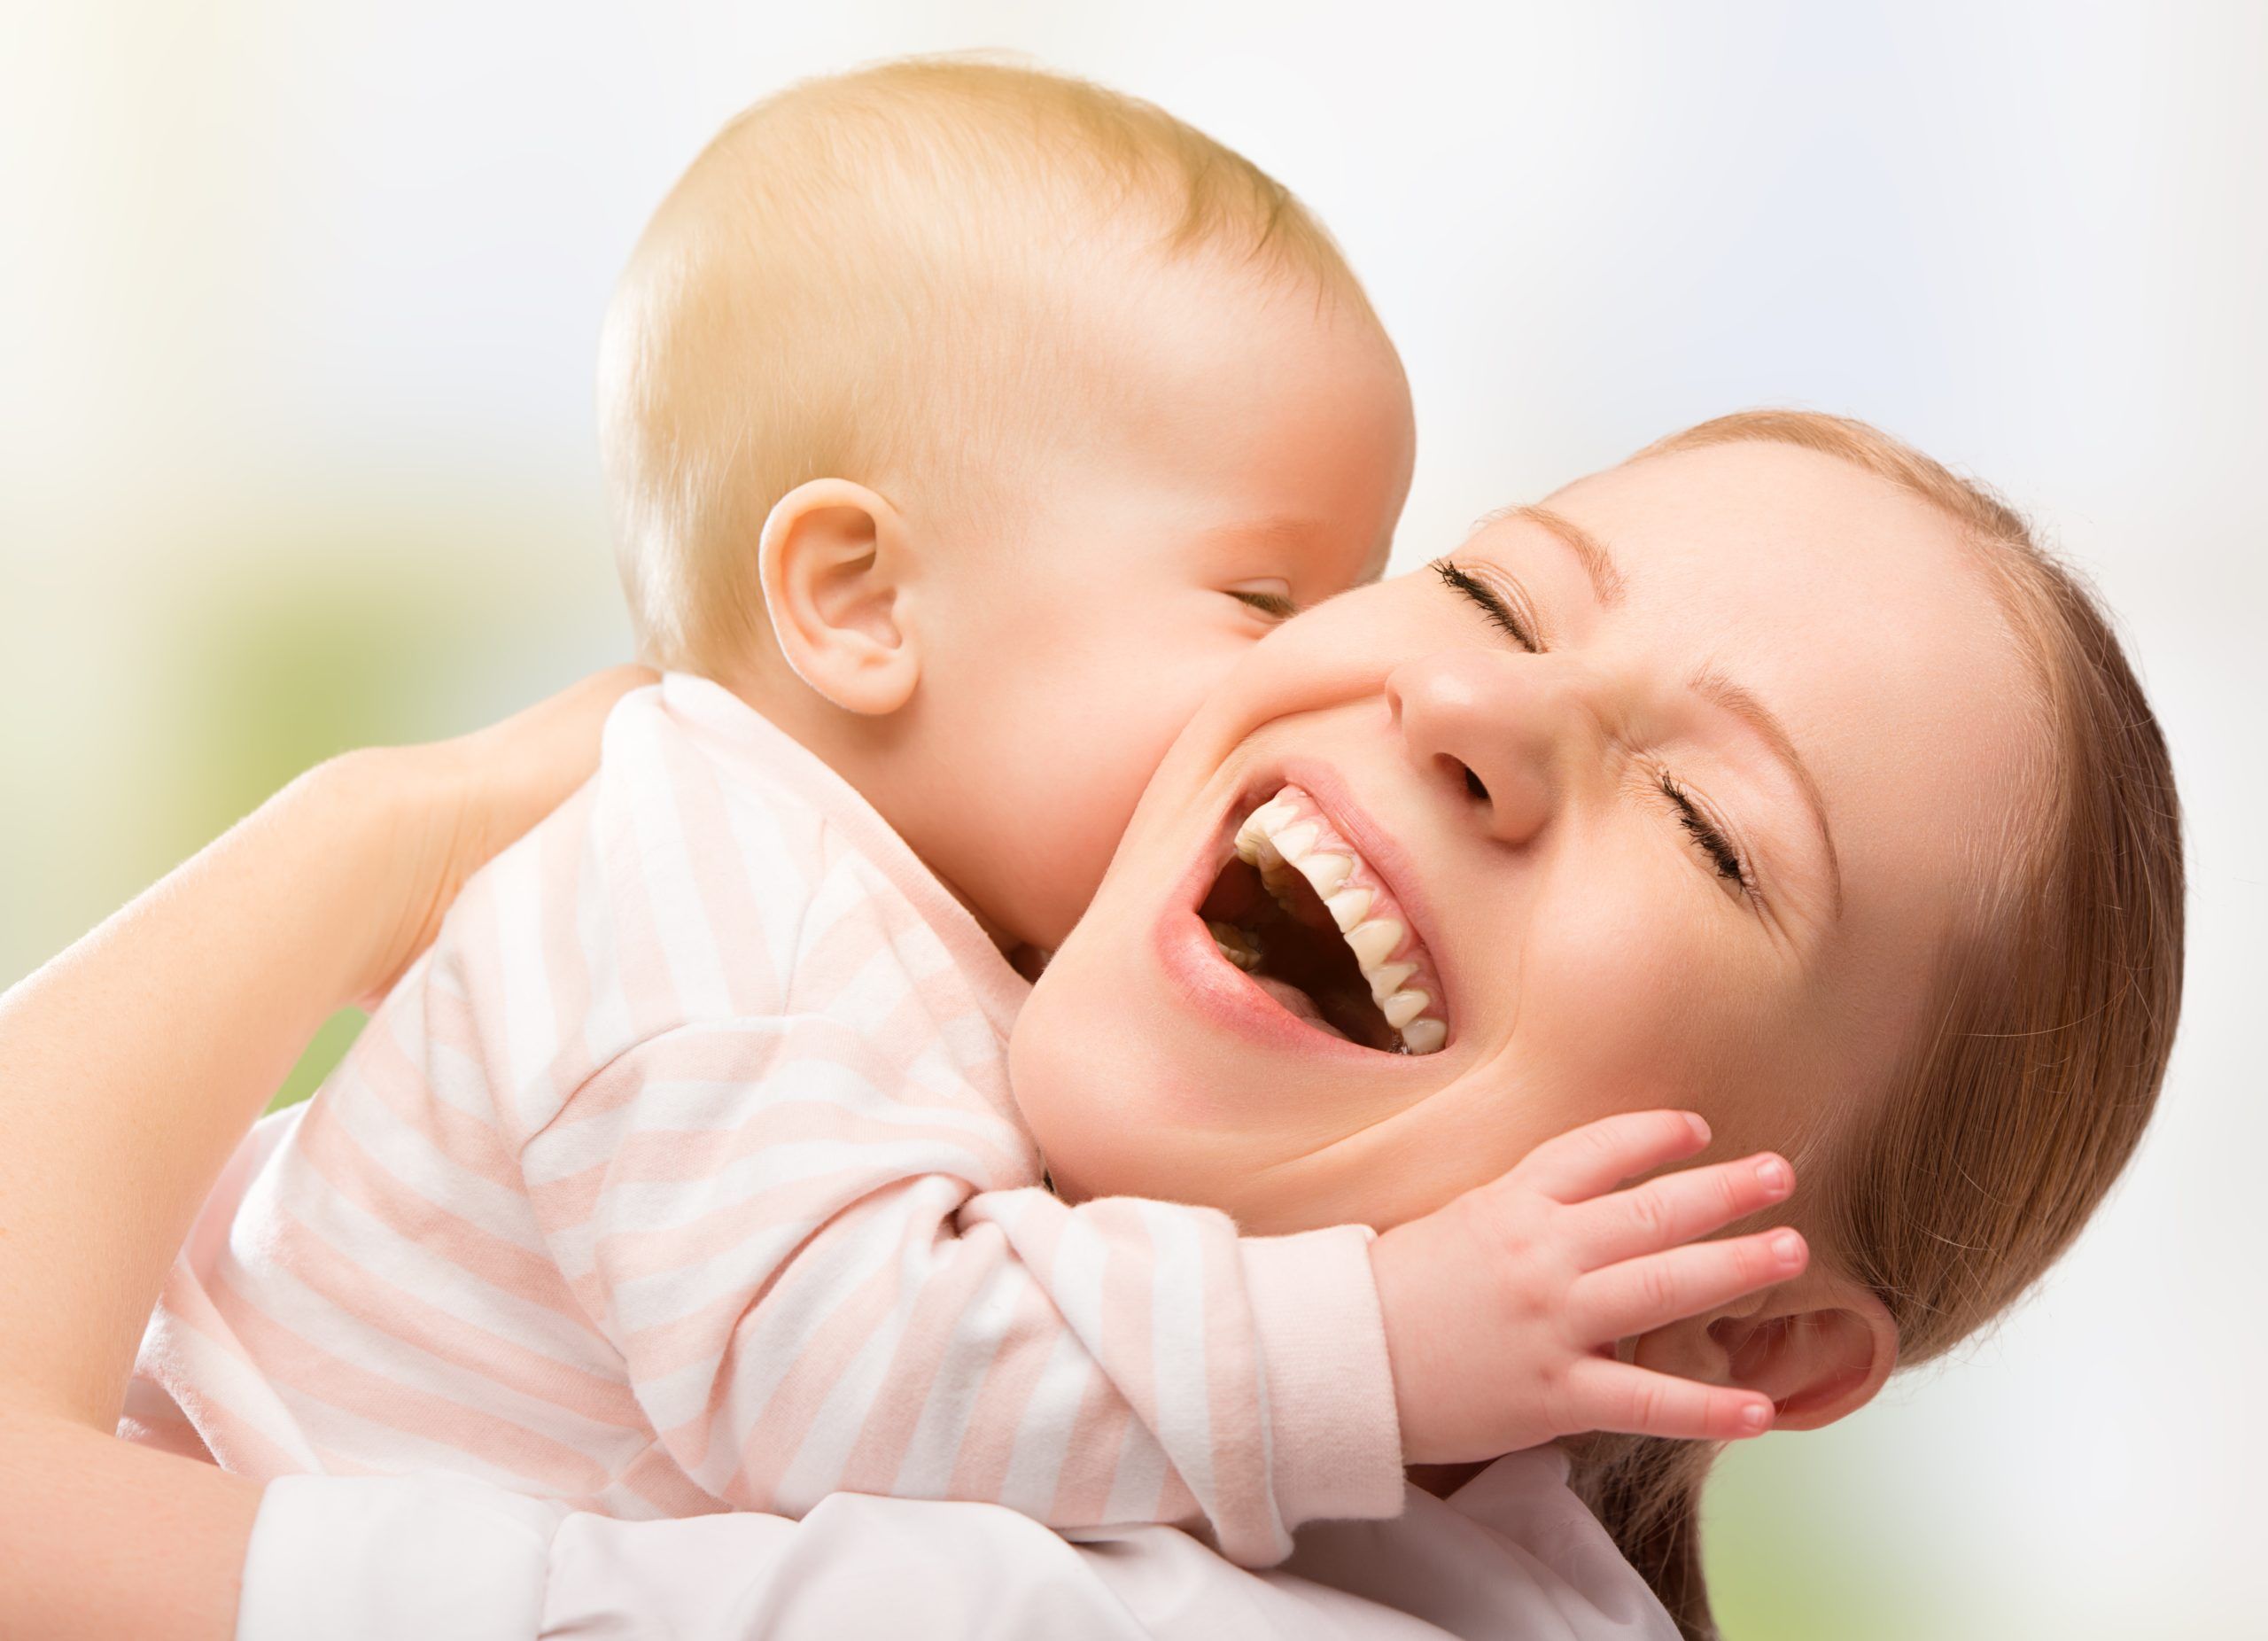 A woman is caressing a baby and smiling with an open mouth.